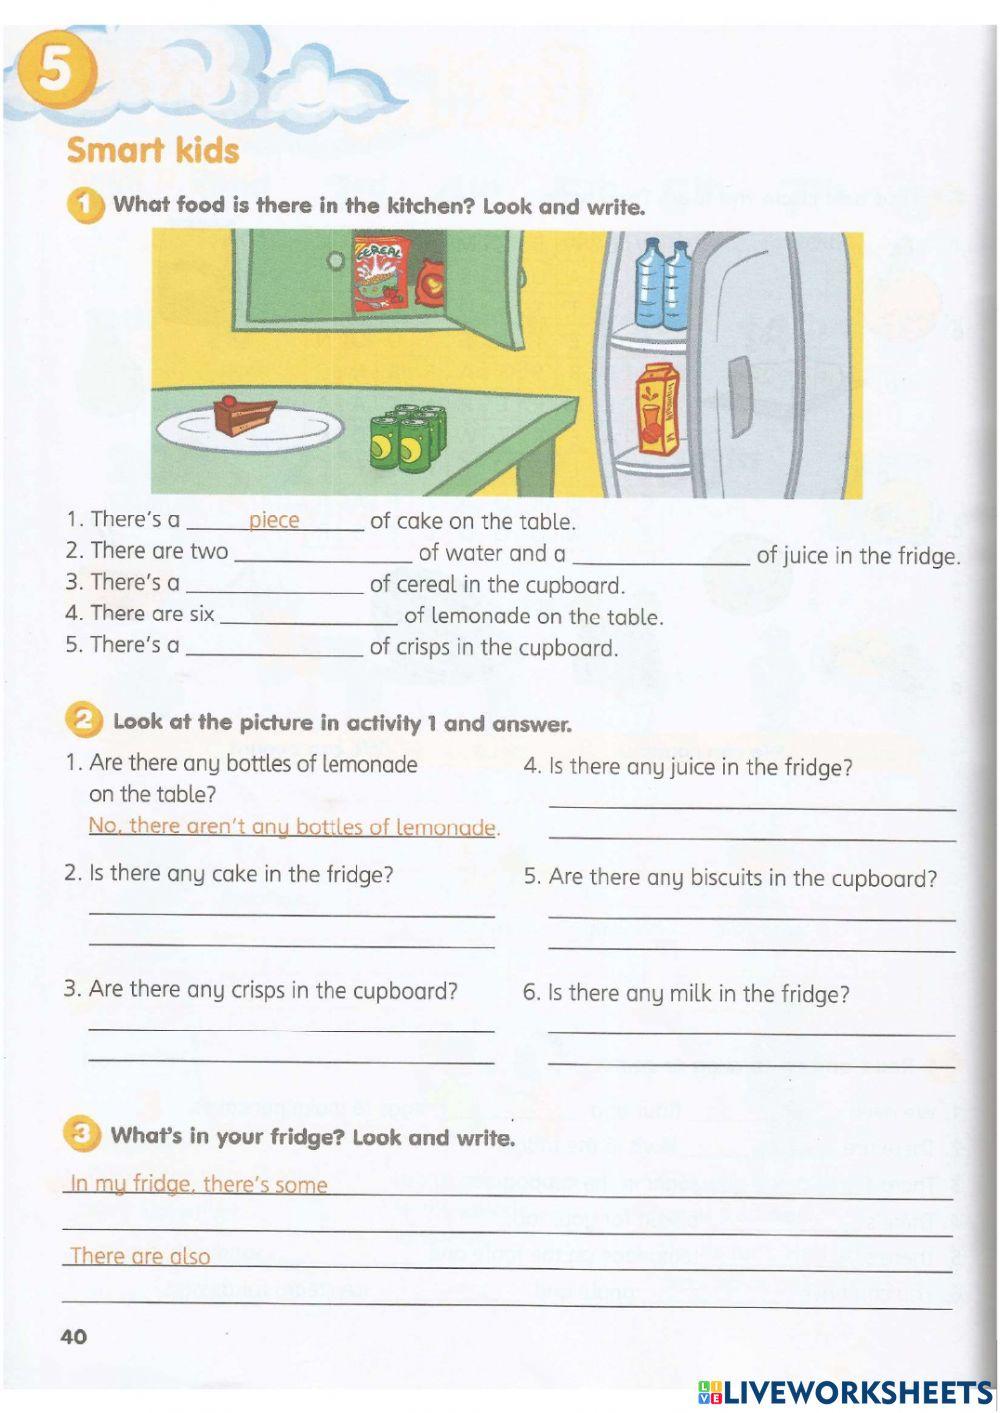 Cefr english year 4 activity book page 40